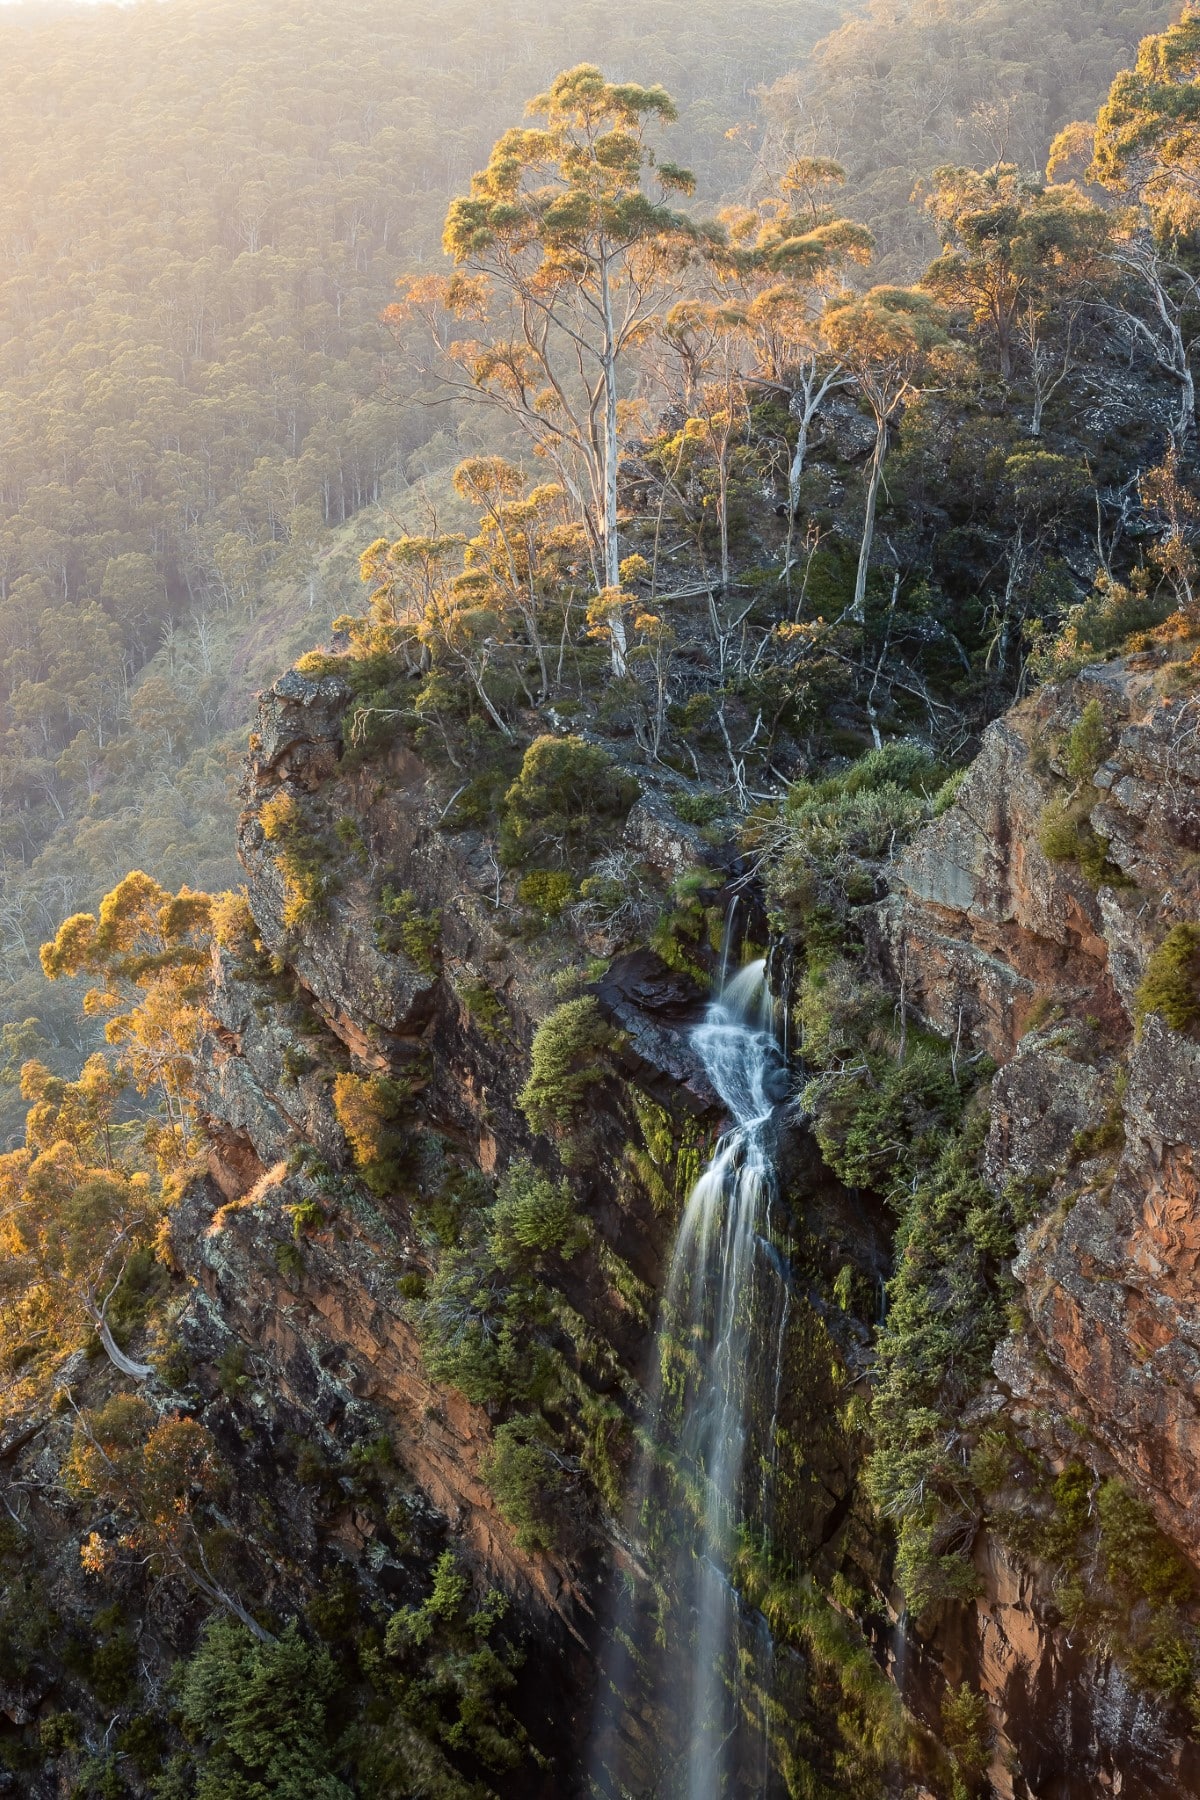 Waterfall on a tree-covered cliff